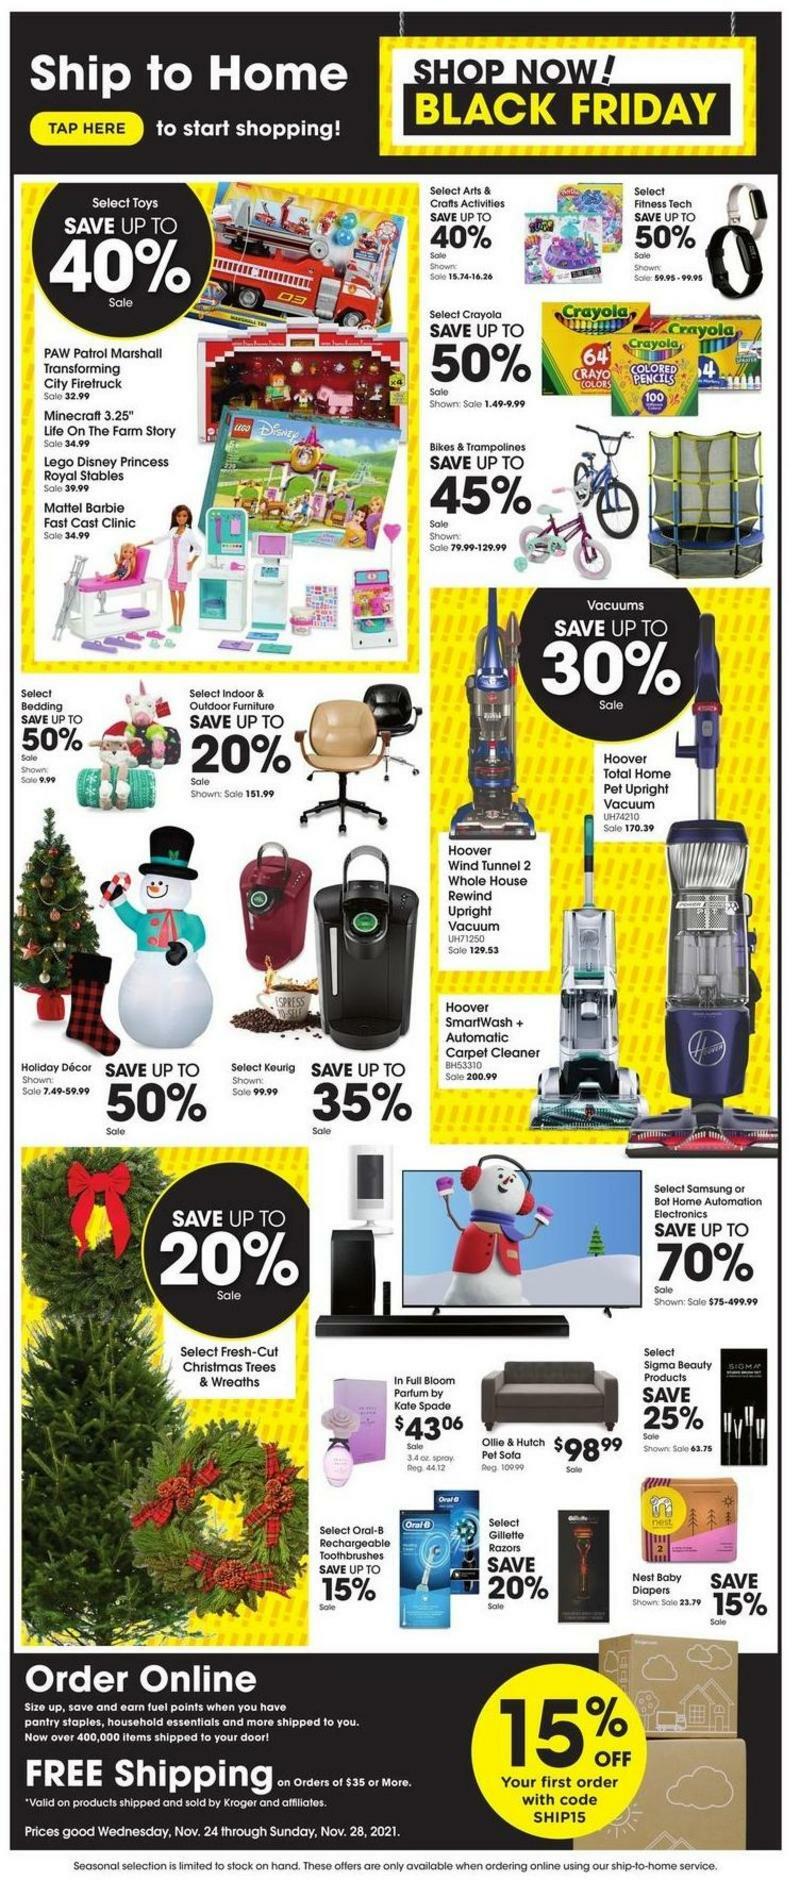 City Market Ship to Home 5-Day Black Friday Sale Weekly Ad from November 24